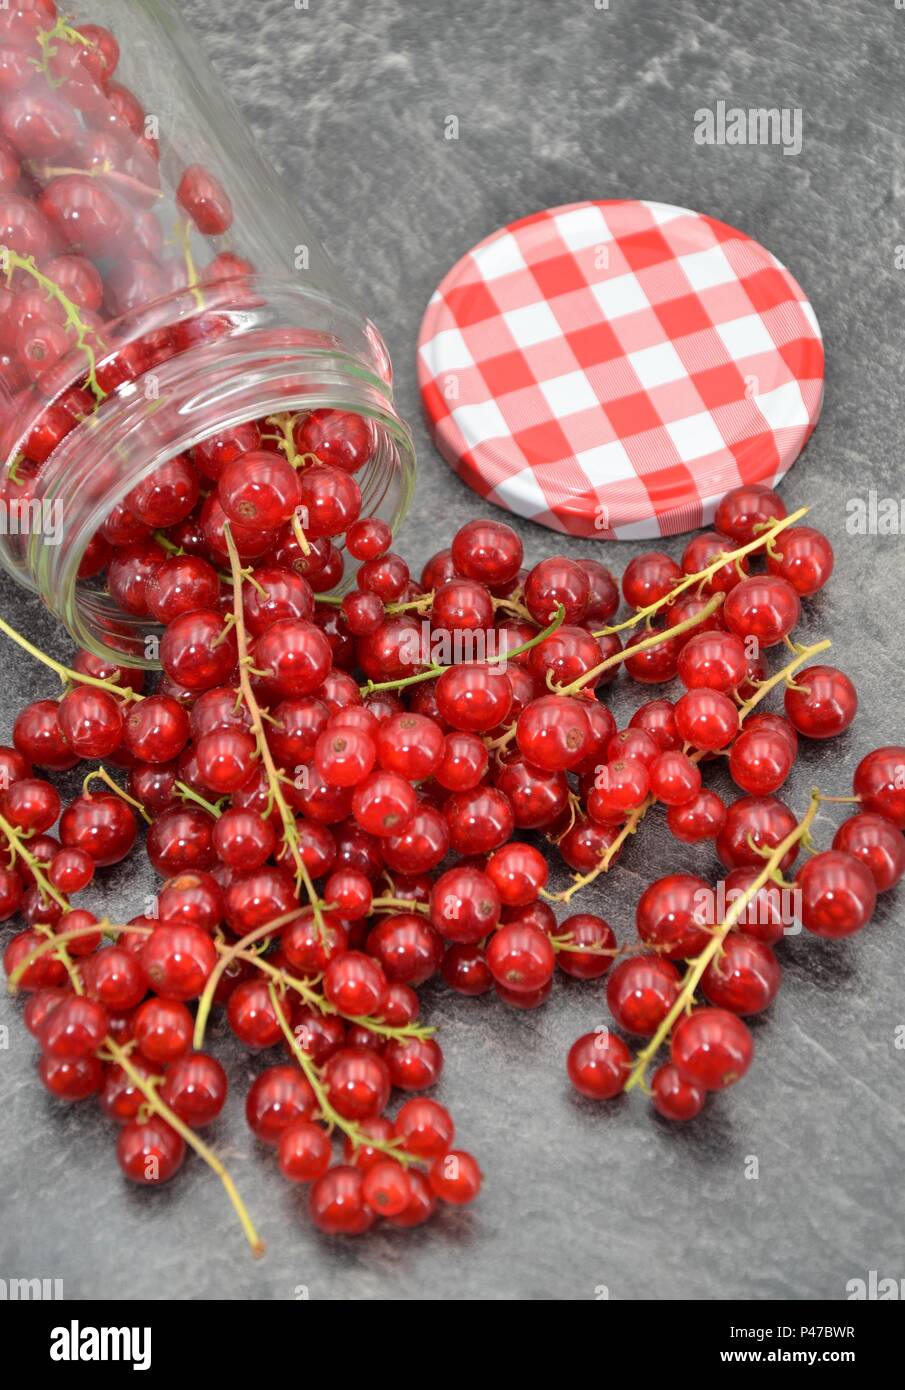 red currants Stock Photo